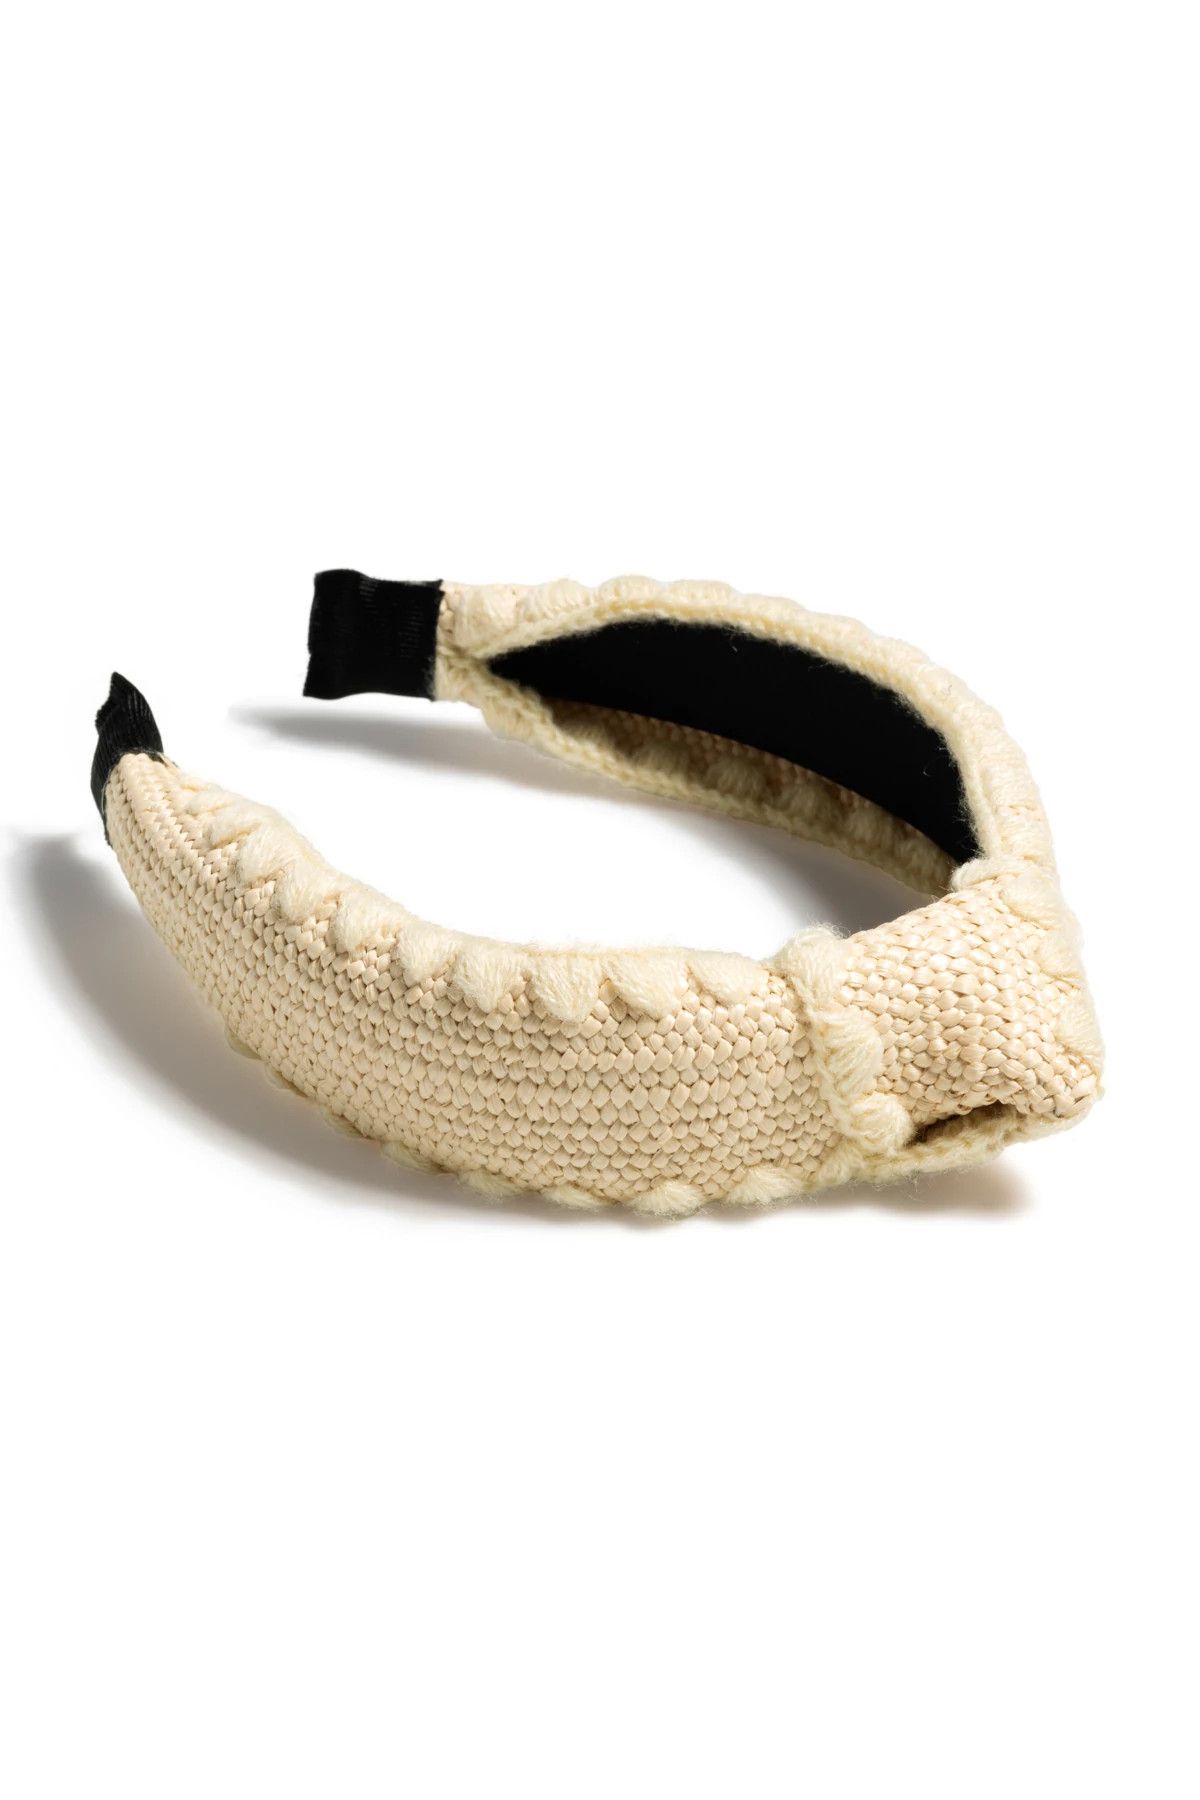 Knotted Woven Headband | Everything But Water